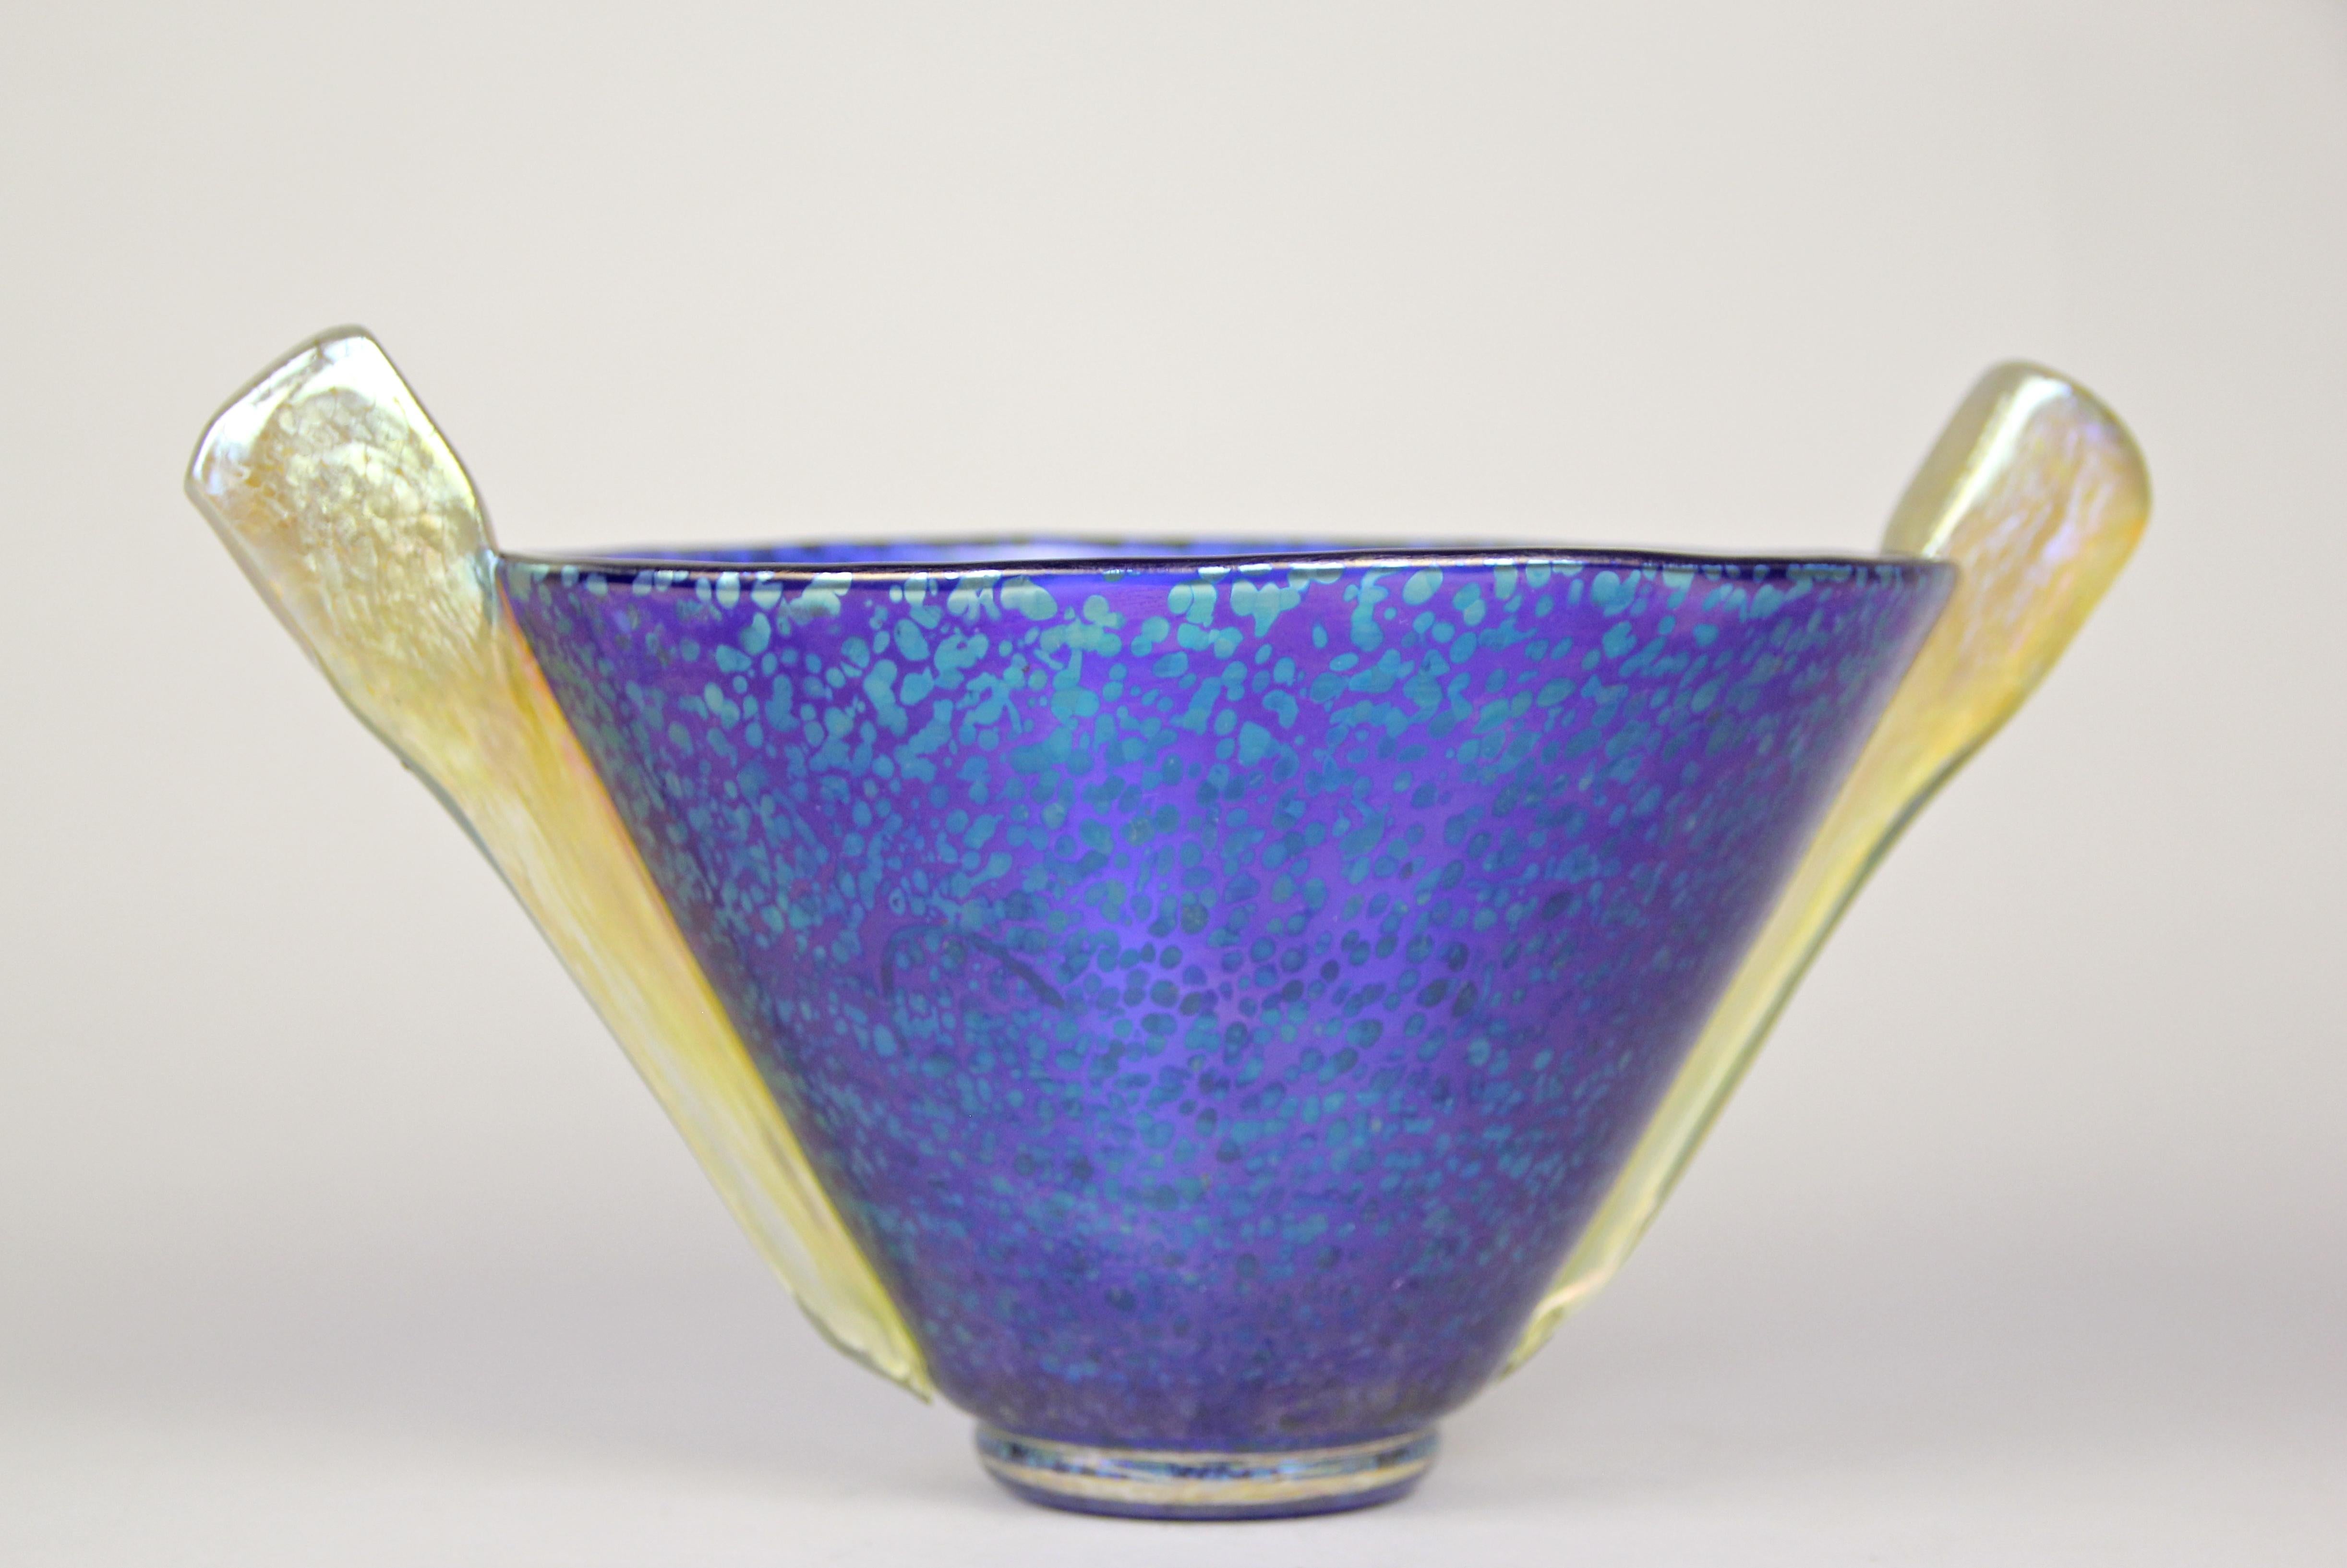 Rare blue glass bowl with handles from the world renown bohemian glass art manufactory of Johann Loetz Witwe circa 1936, decor Papillon variation, design attributed to the famous Czech painter and glass artist Marie Kirschner. Cobalt blue